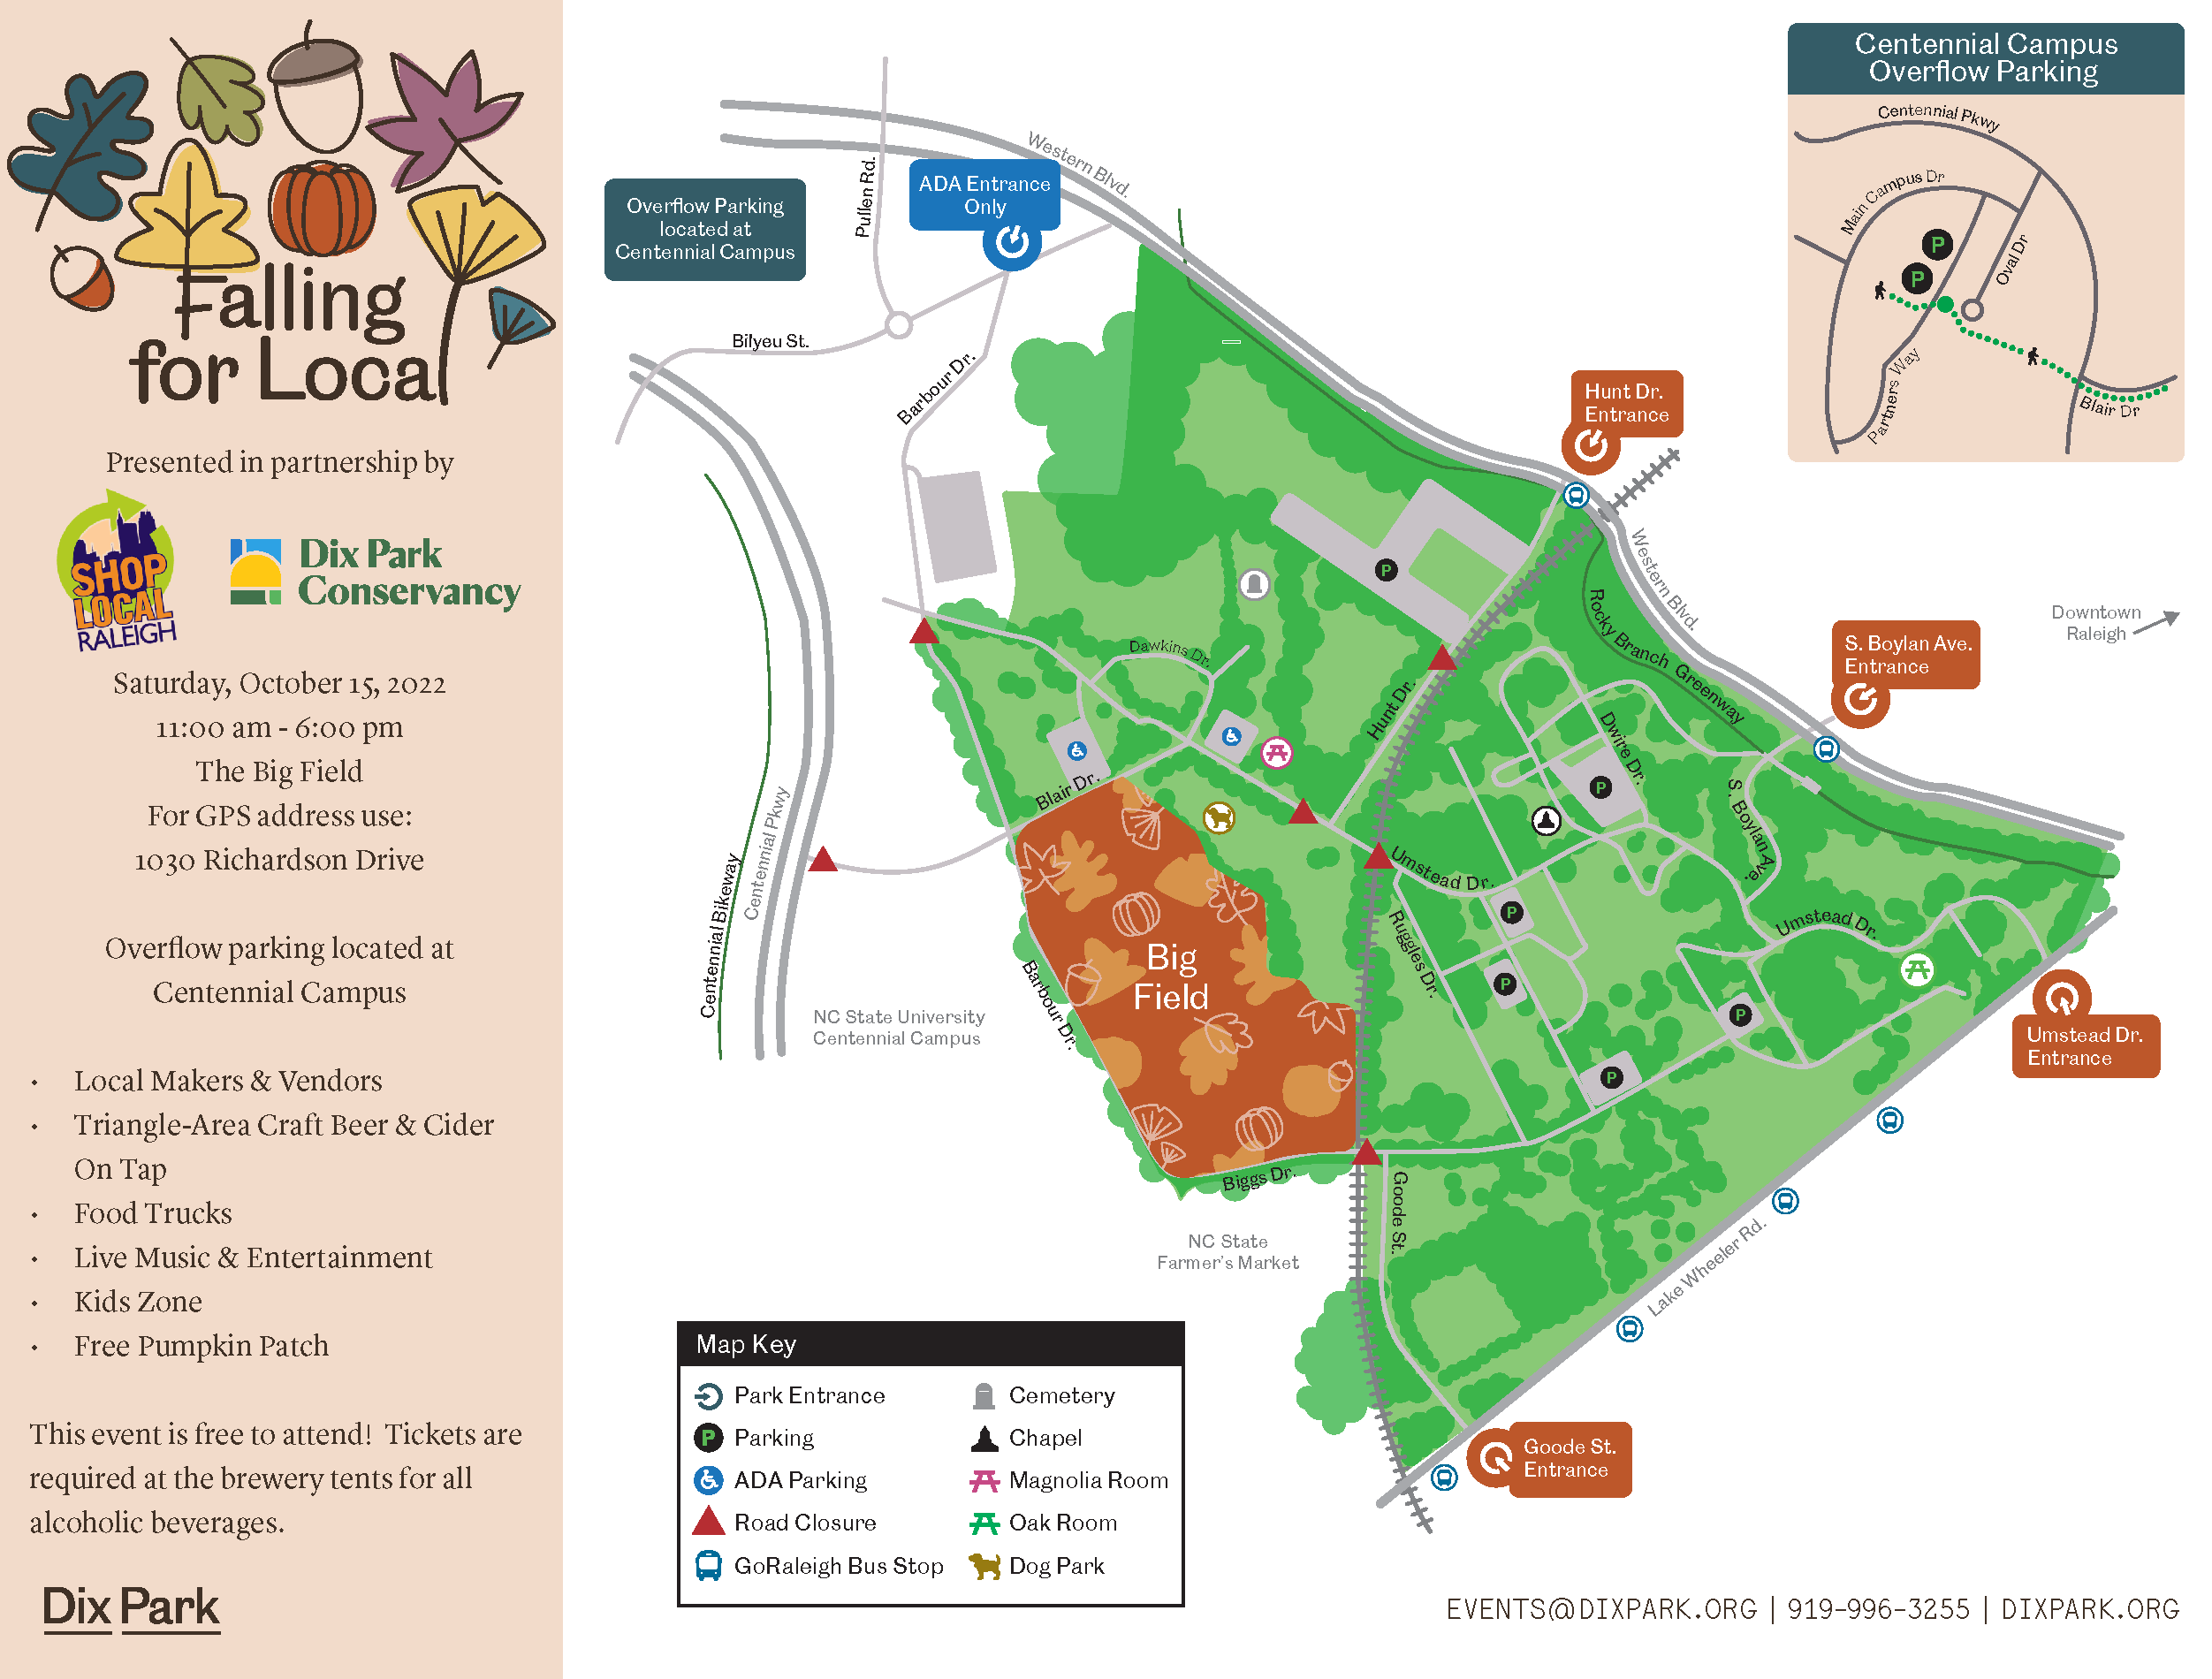 Falling for Local event parking map